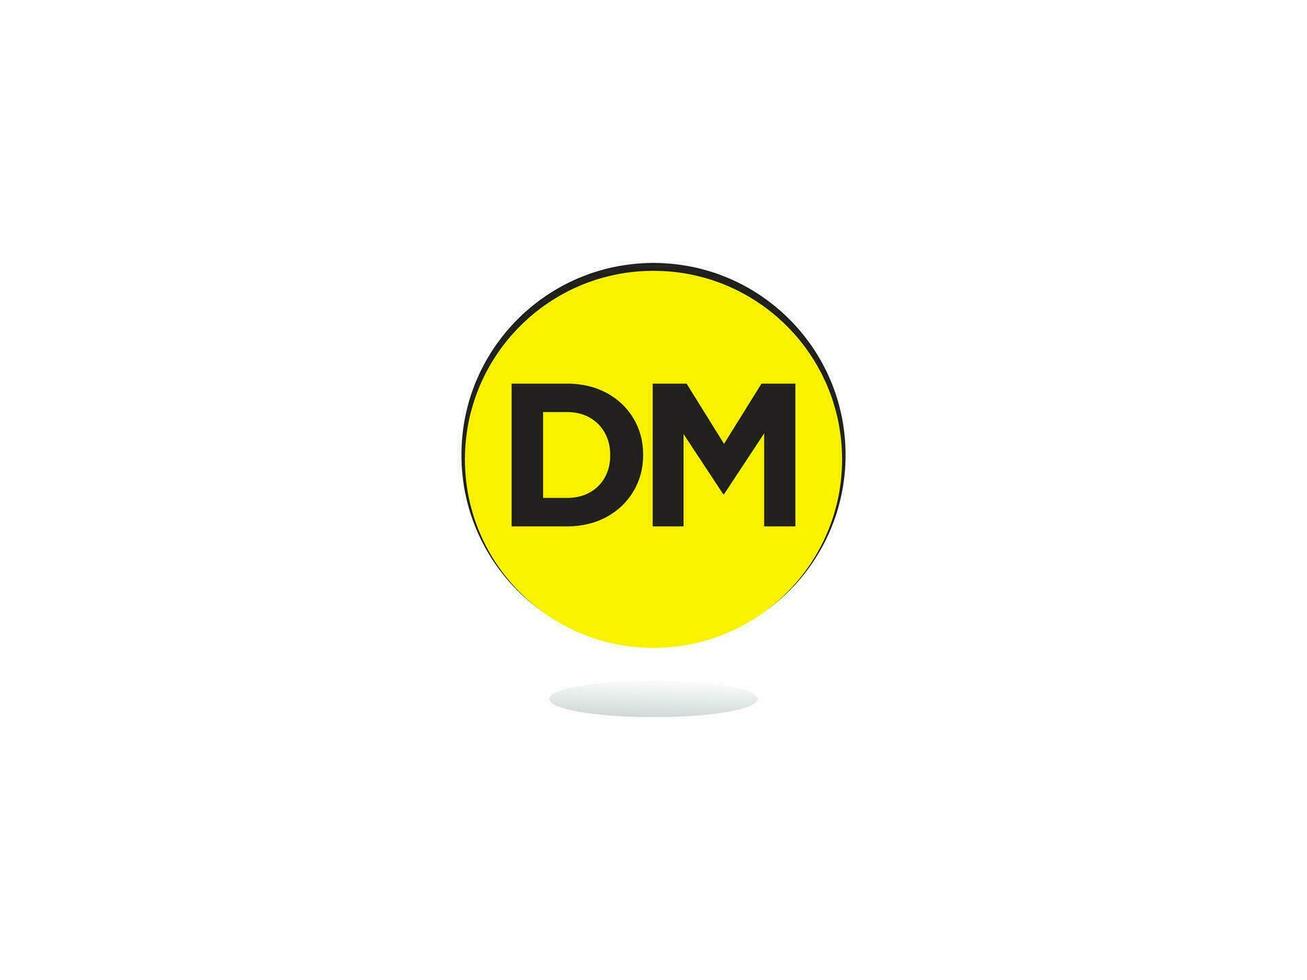 Creative Dm md Logo Letter Vector Icon For Shop